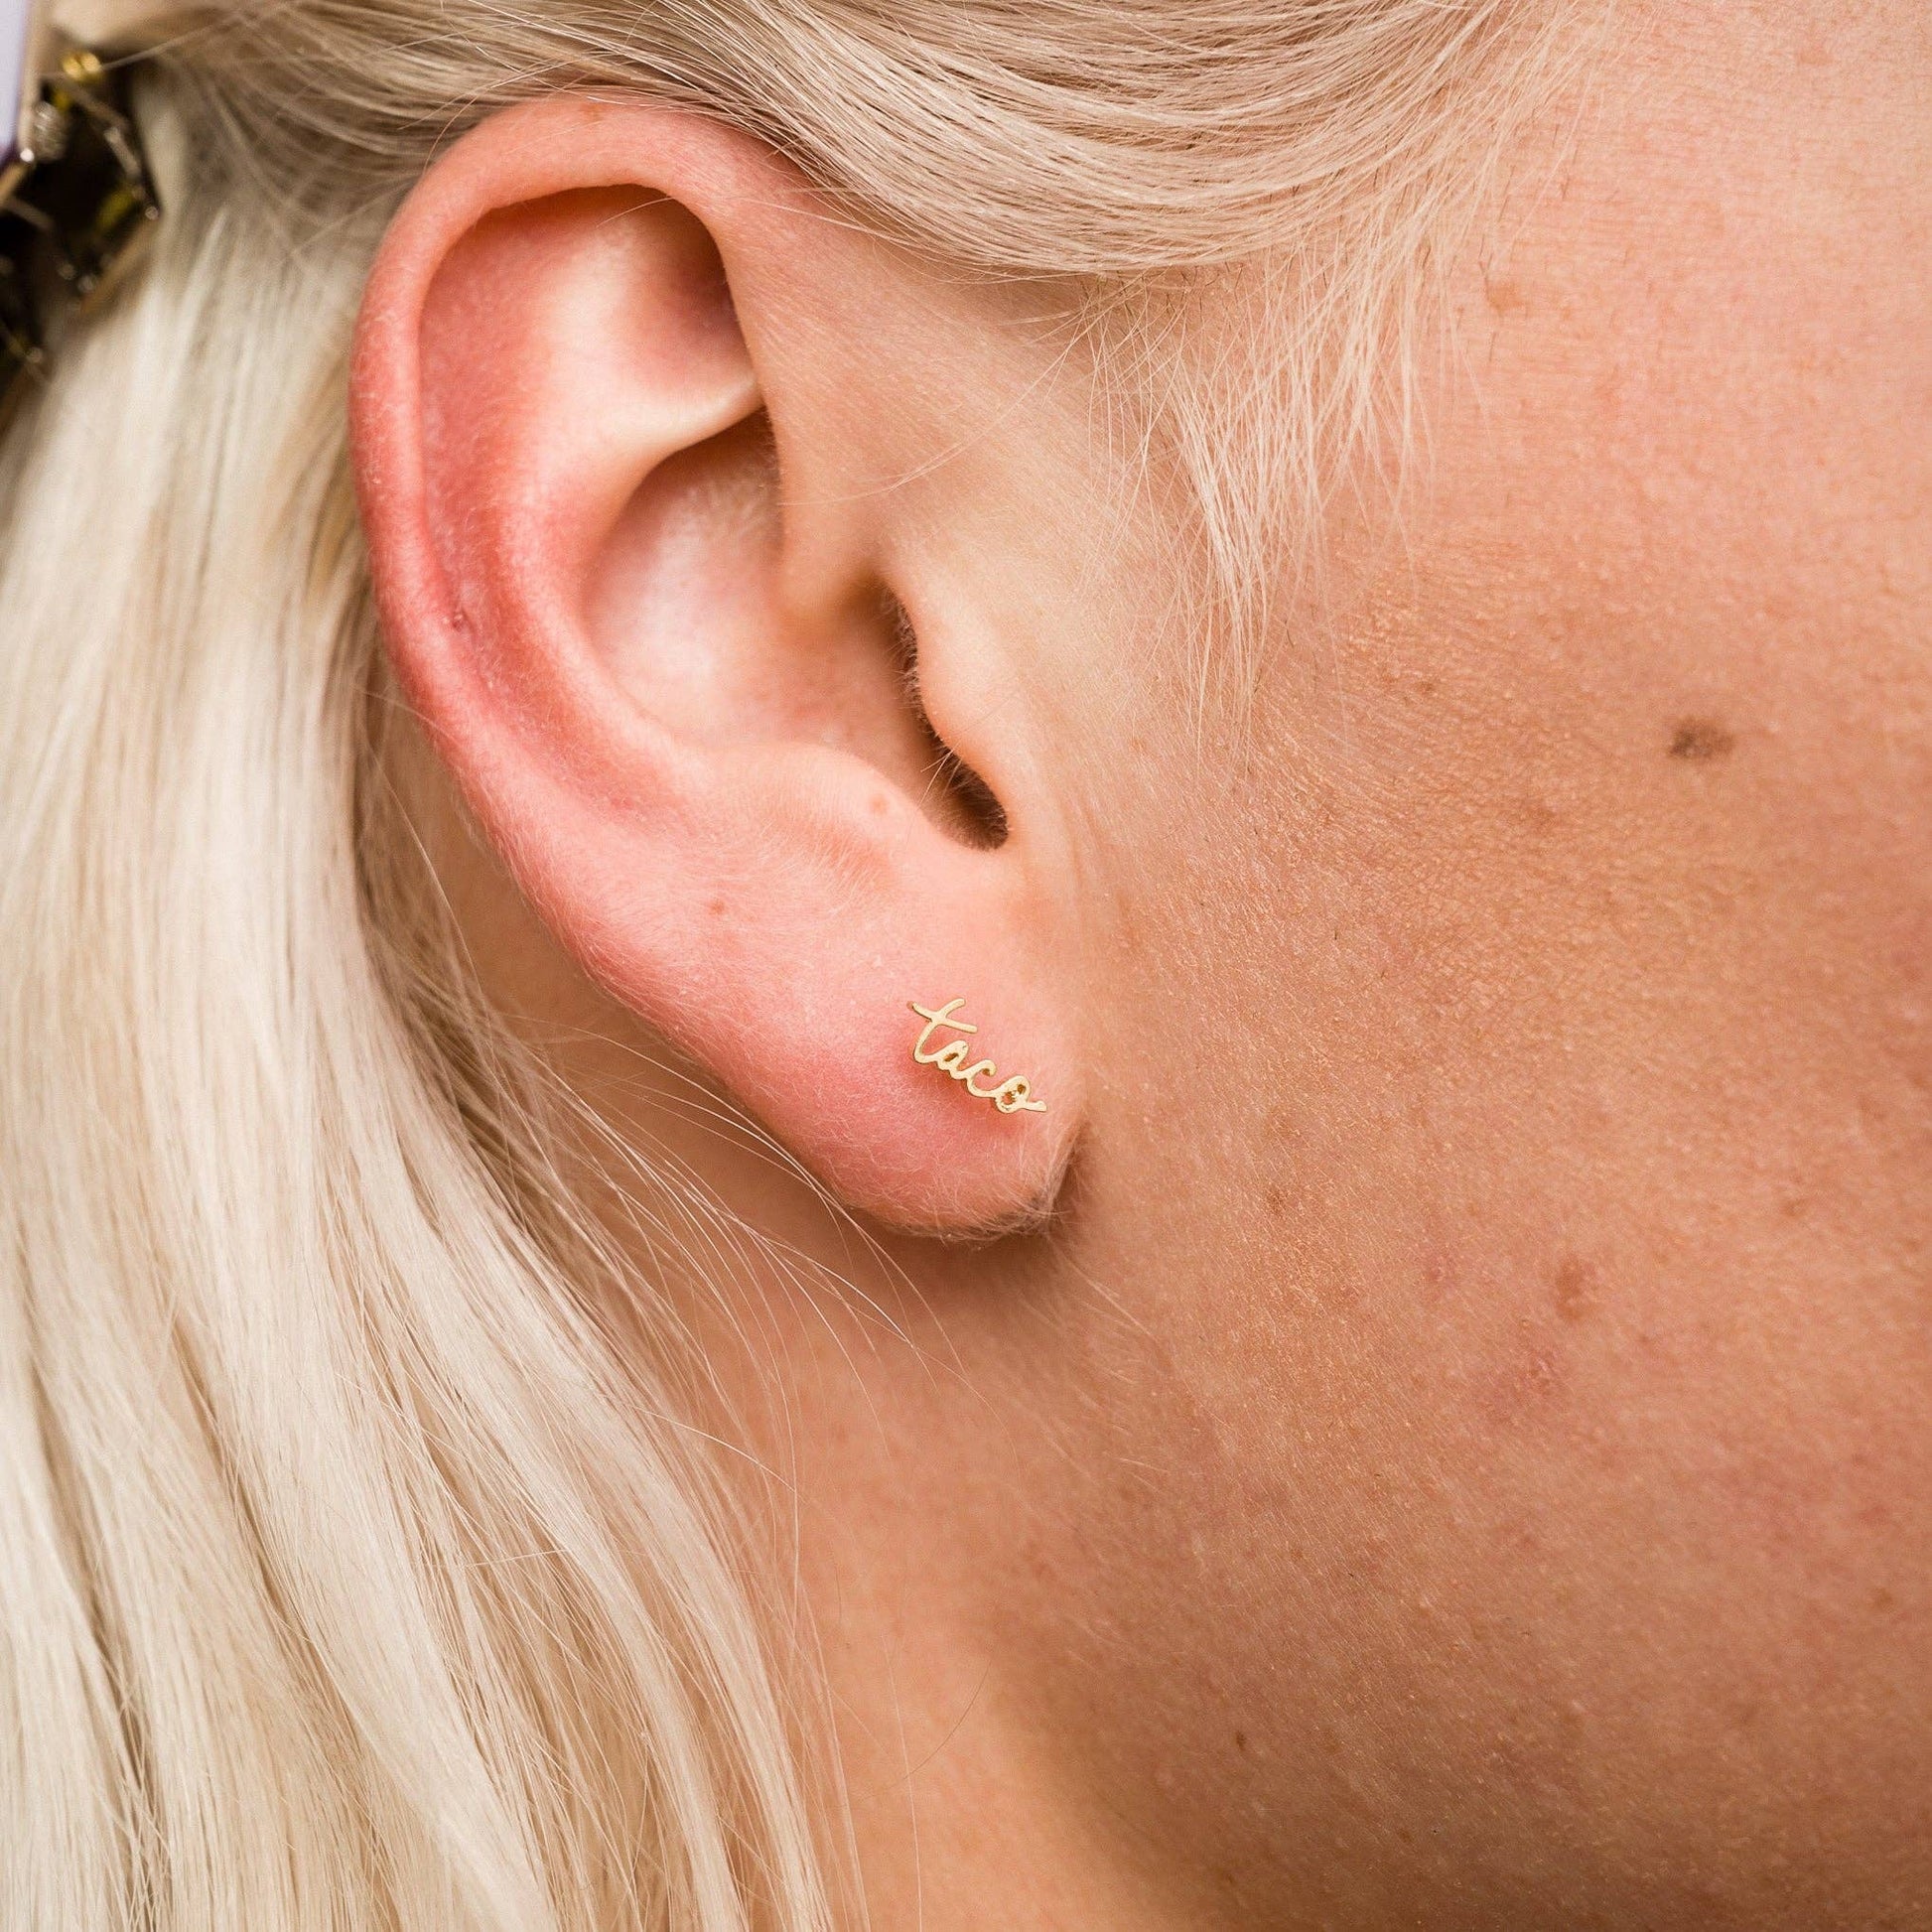 14k gold plated, single stud earring in script text that reads "taco" -- worn on ear 